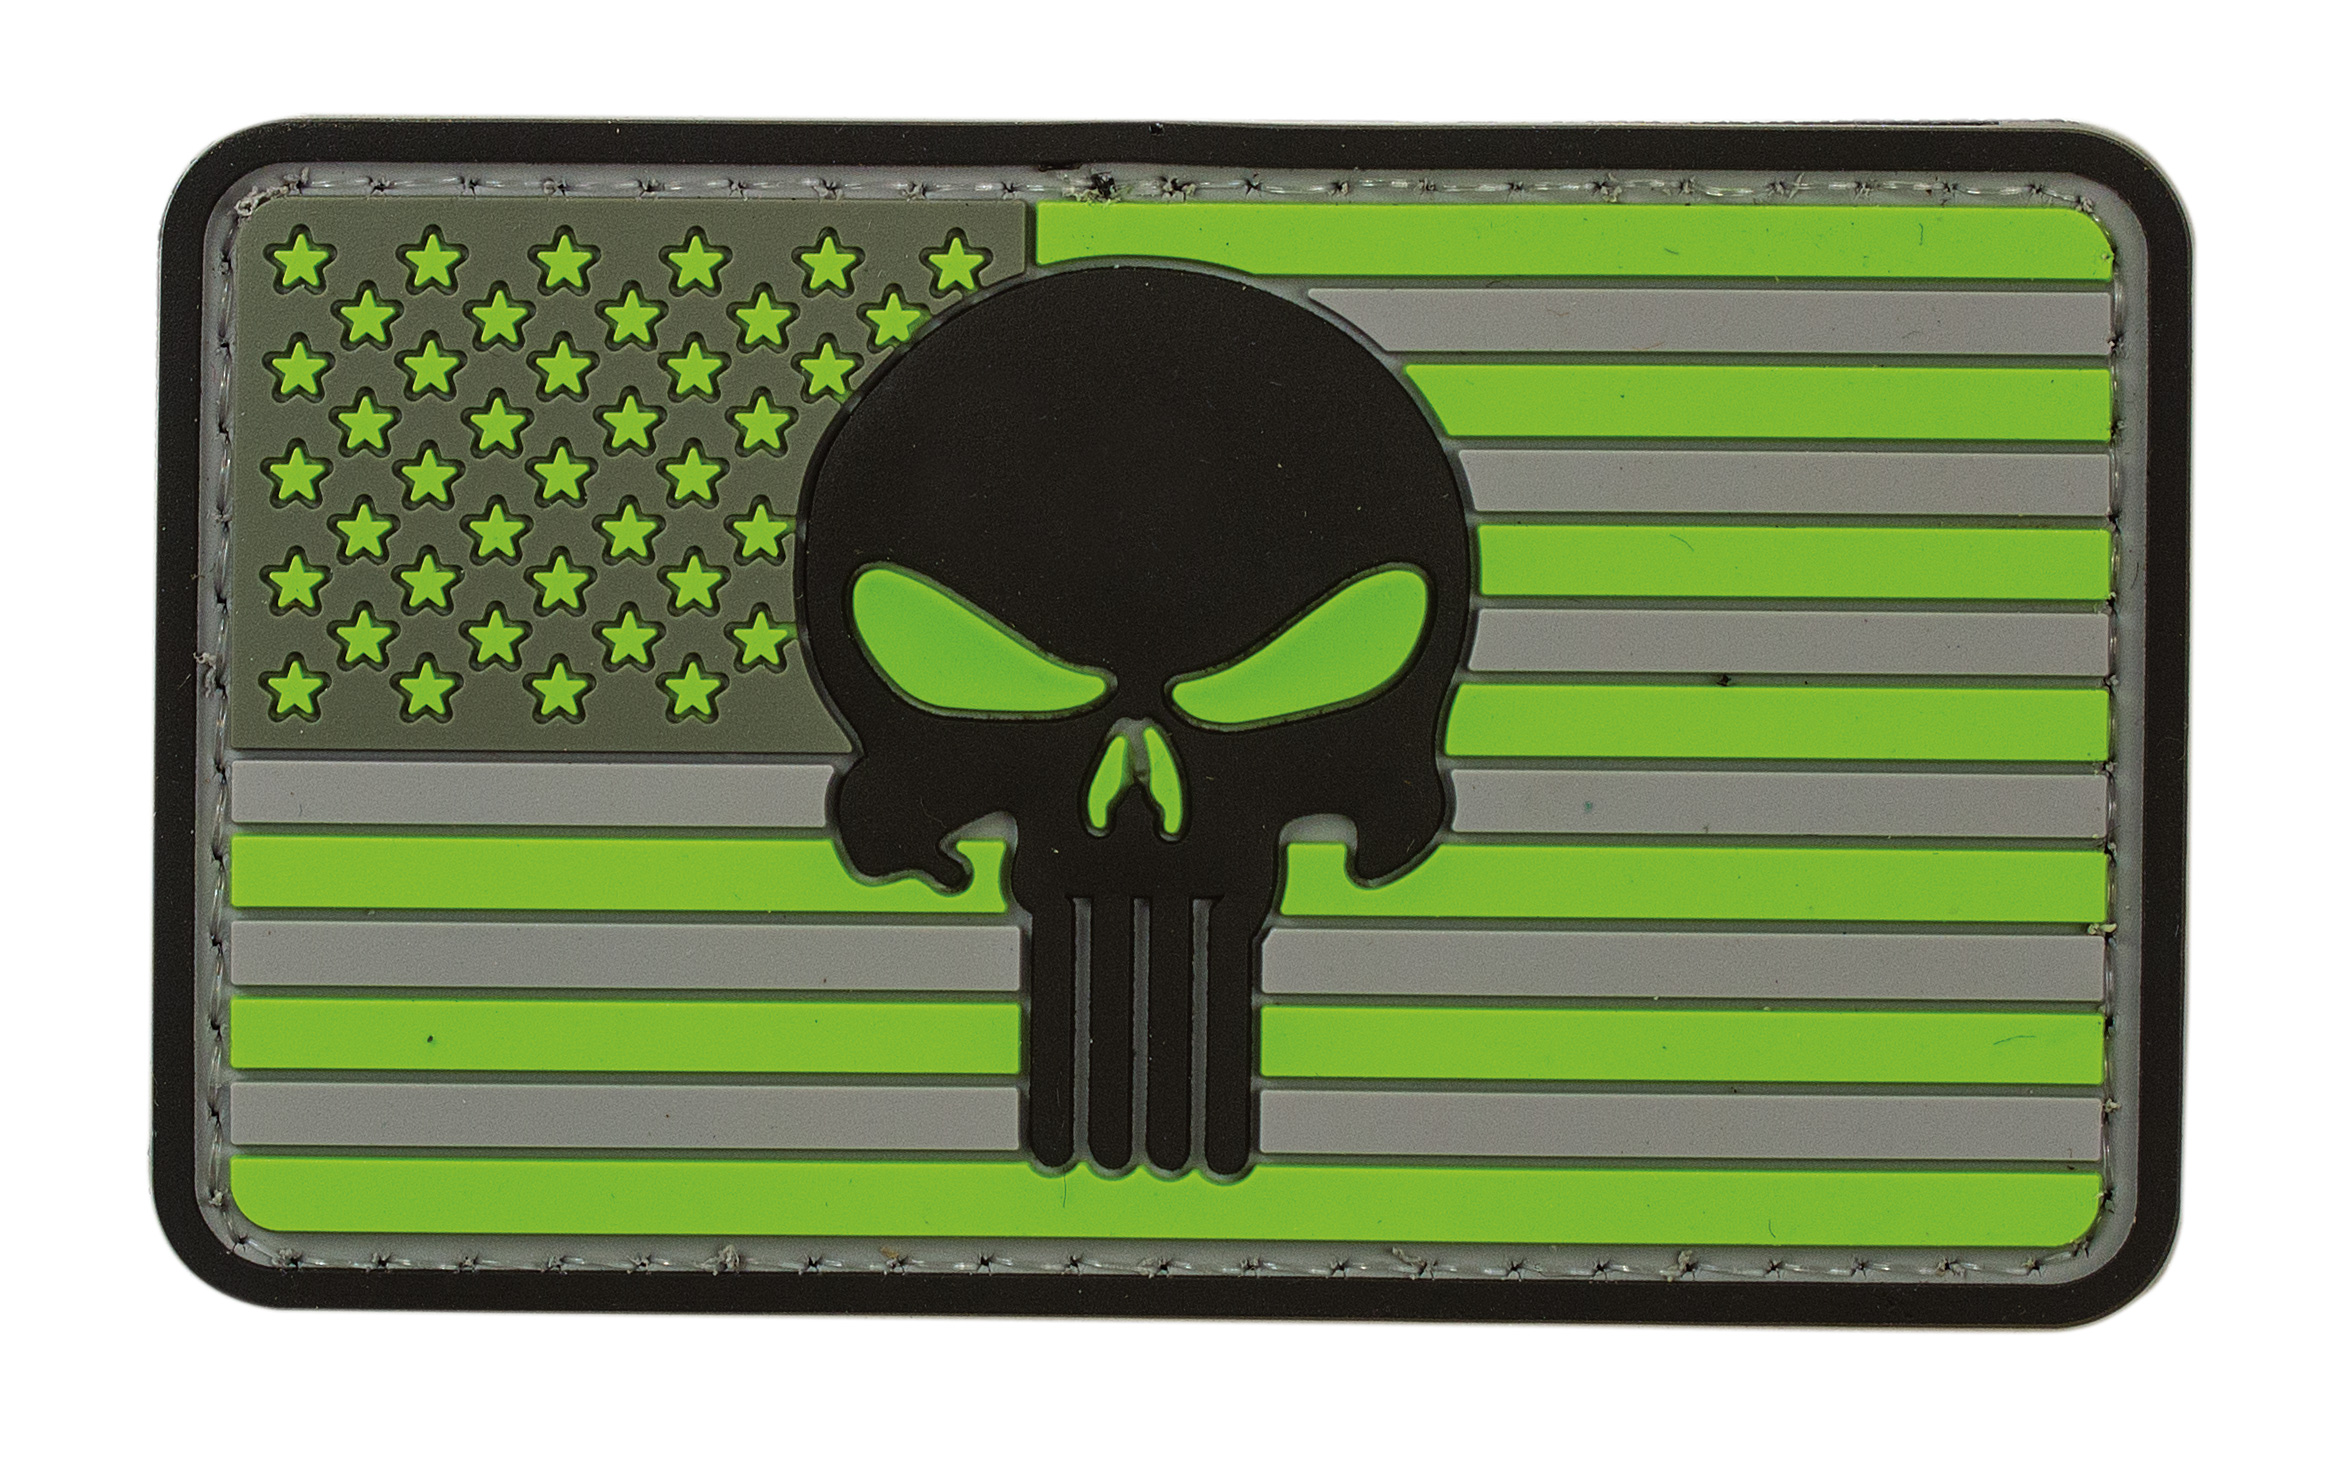 round punisher skull tactical badge embroidery